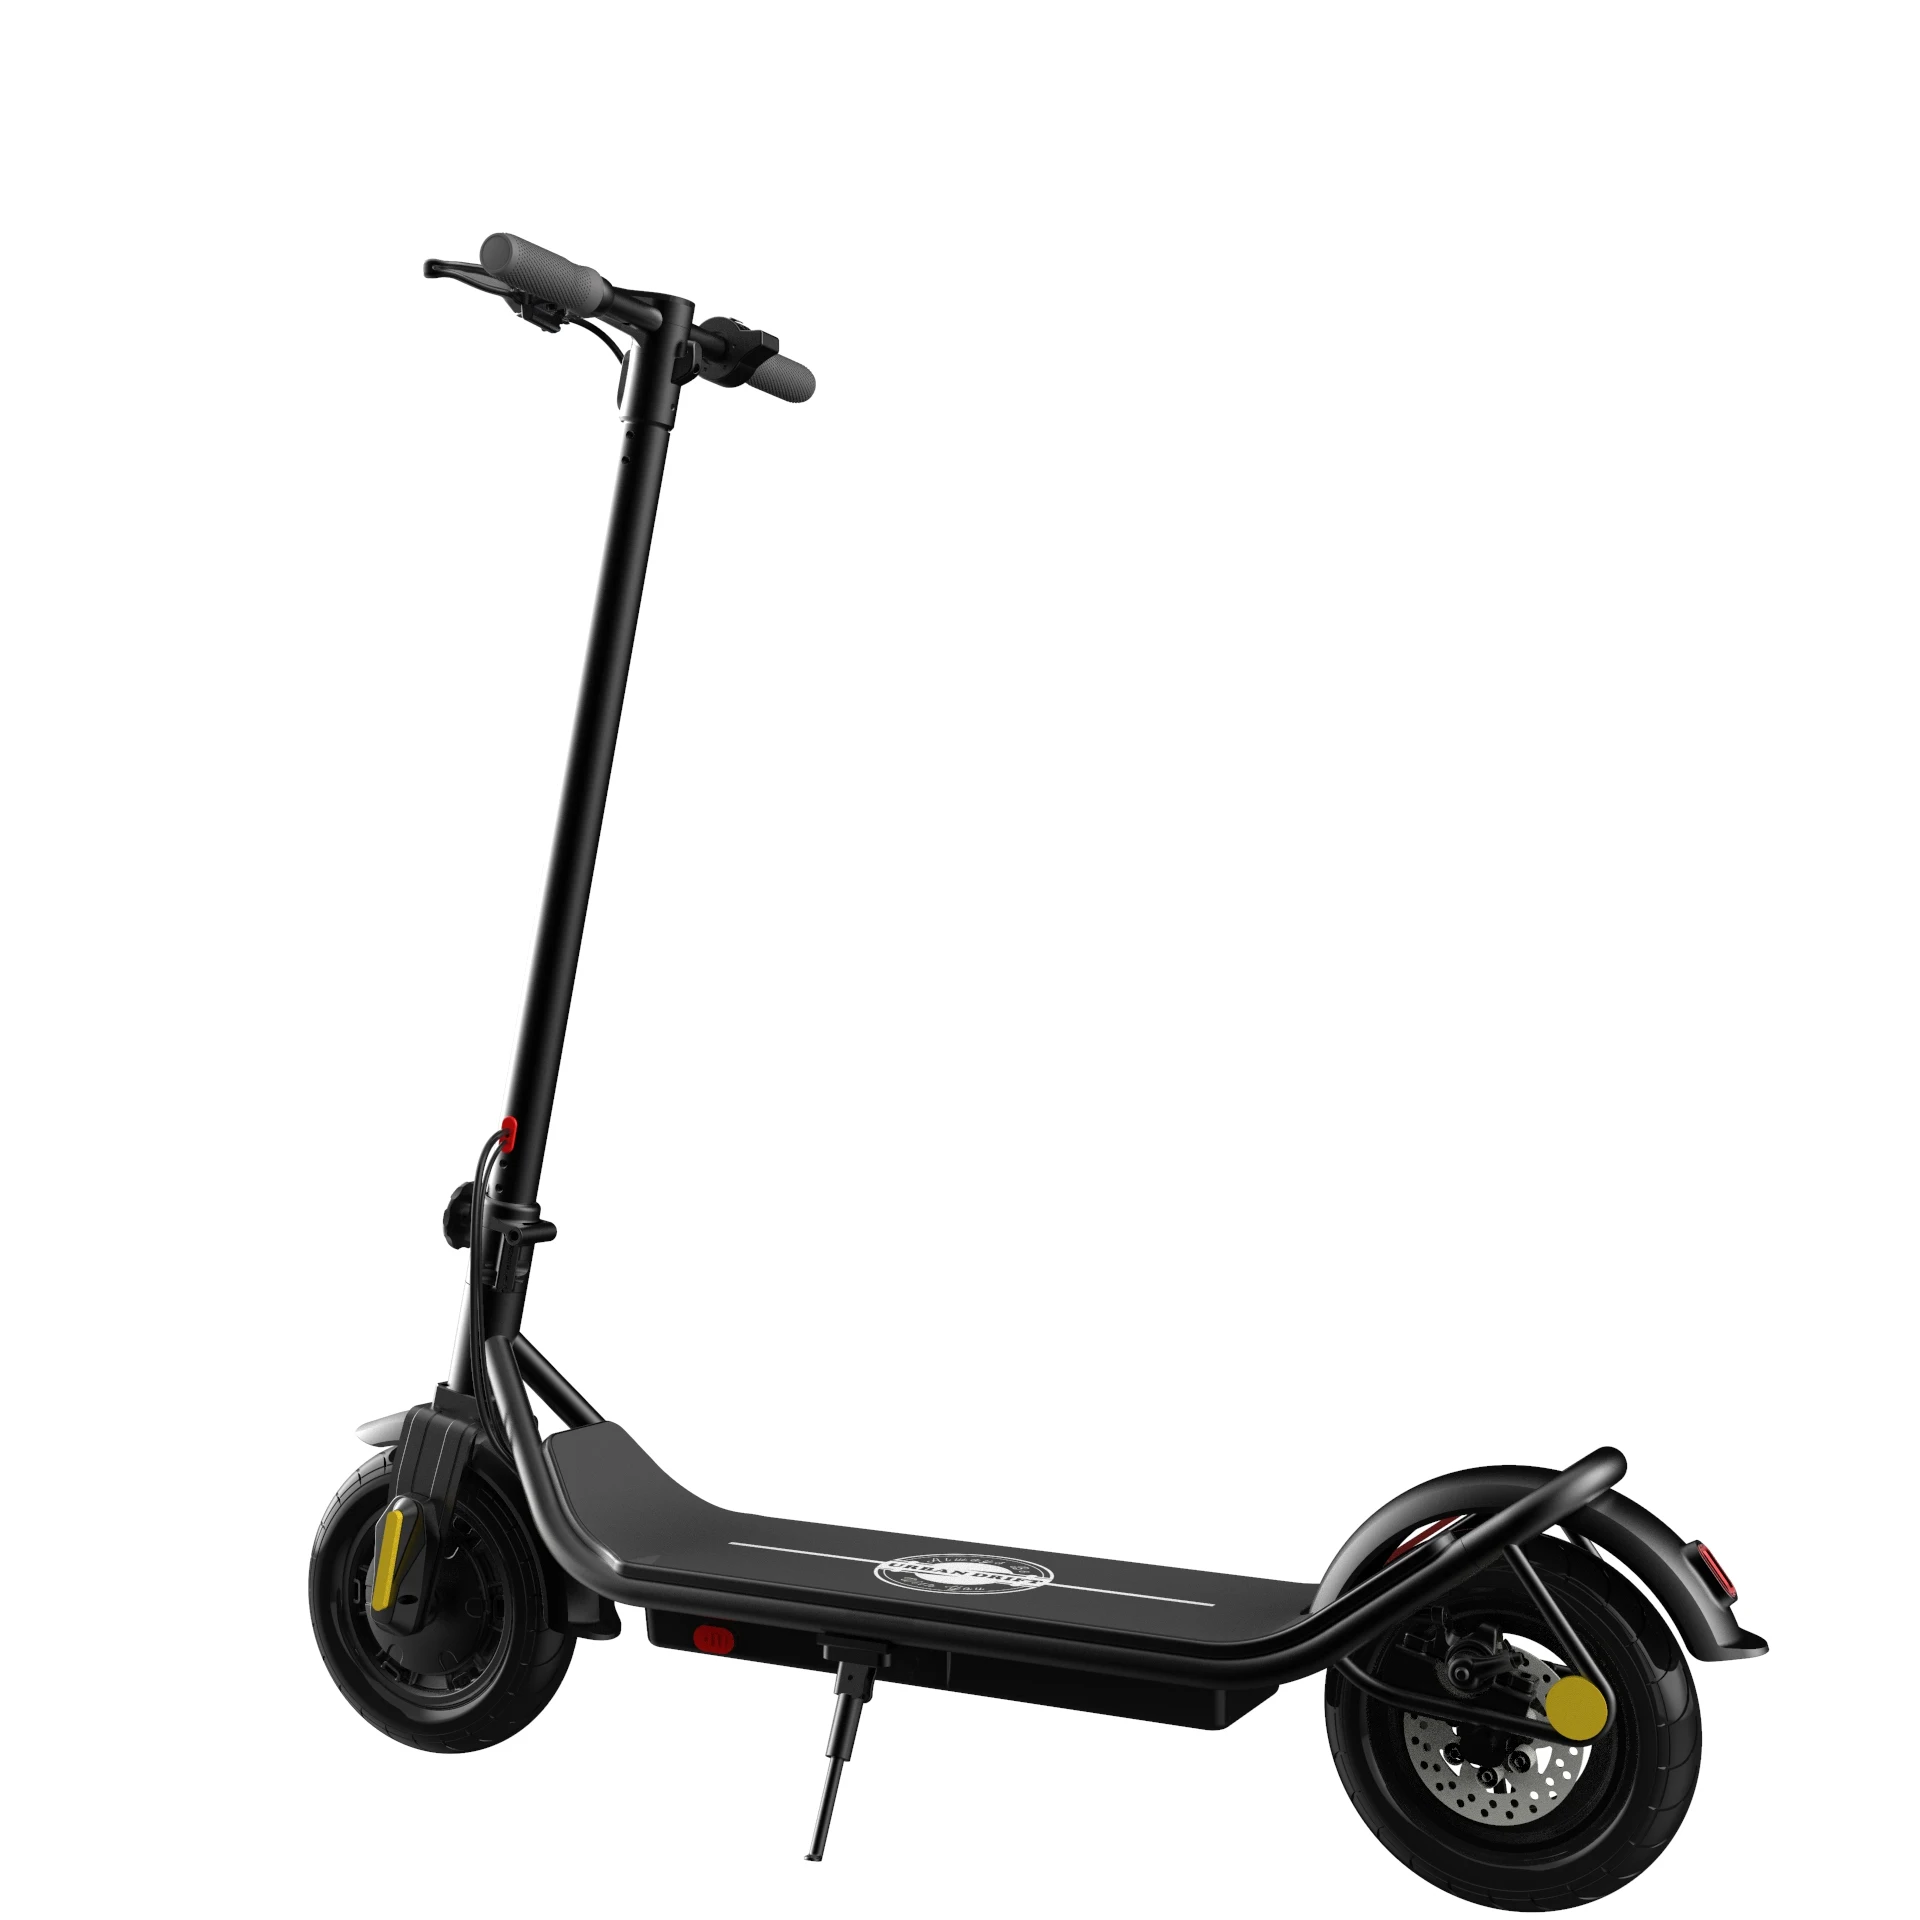 

Popular 350W Scooters Dropshipping 10Inch Folding China Electric Motorcycle Scooter Adult Cheap Foldable Electric Scooters, Black,red,yellow